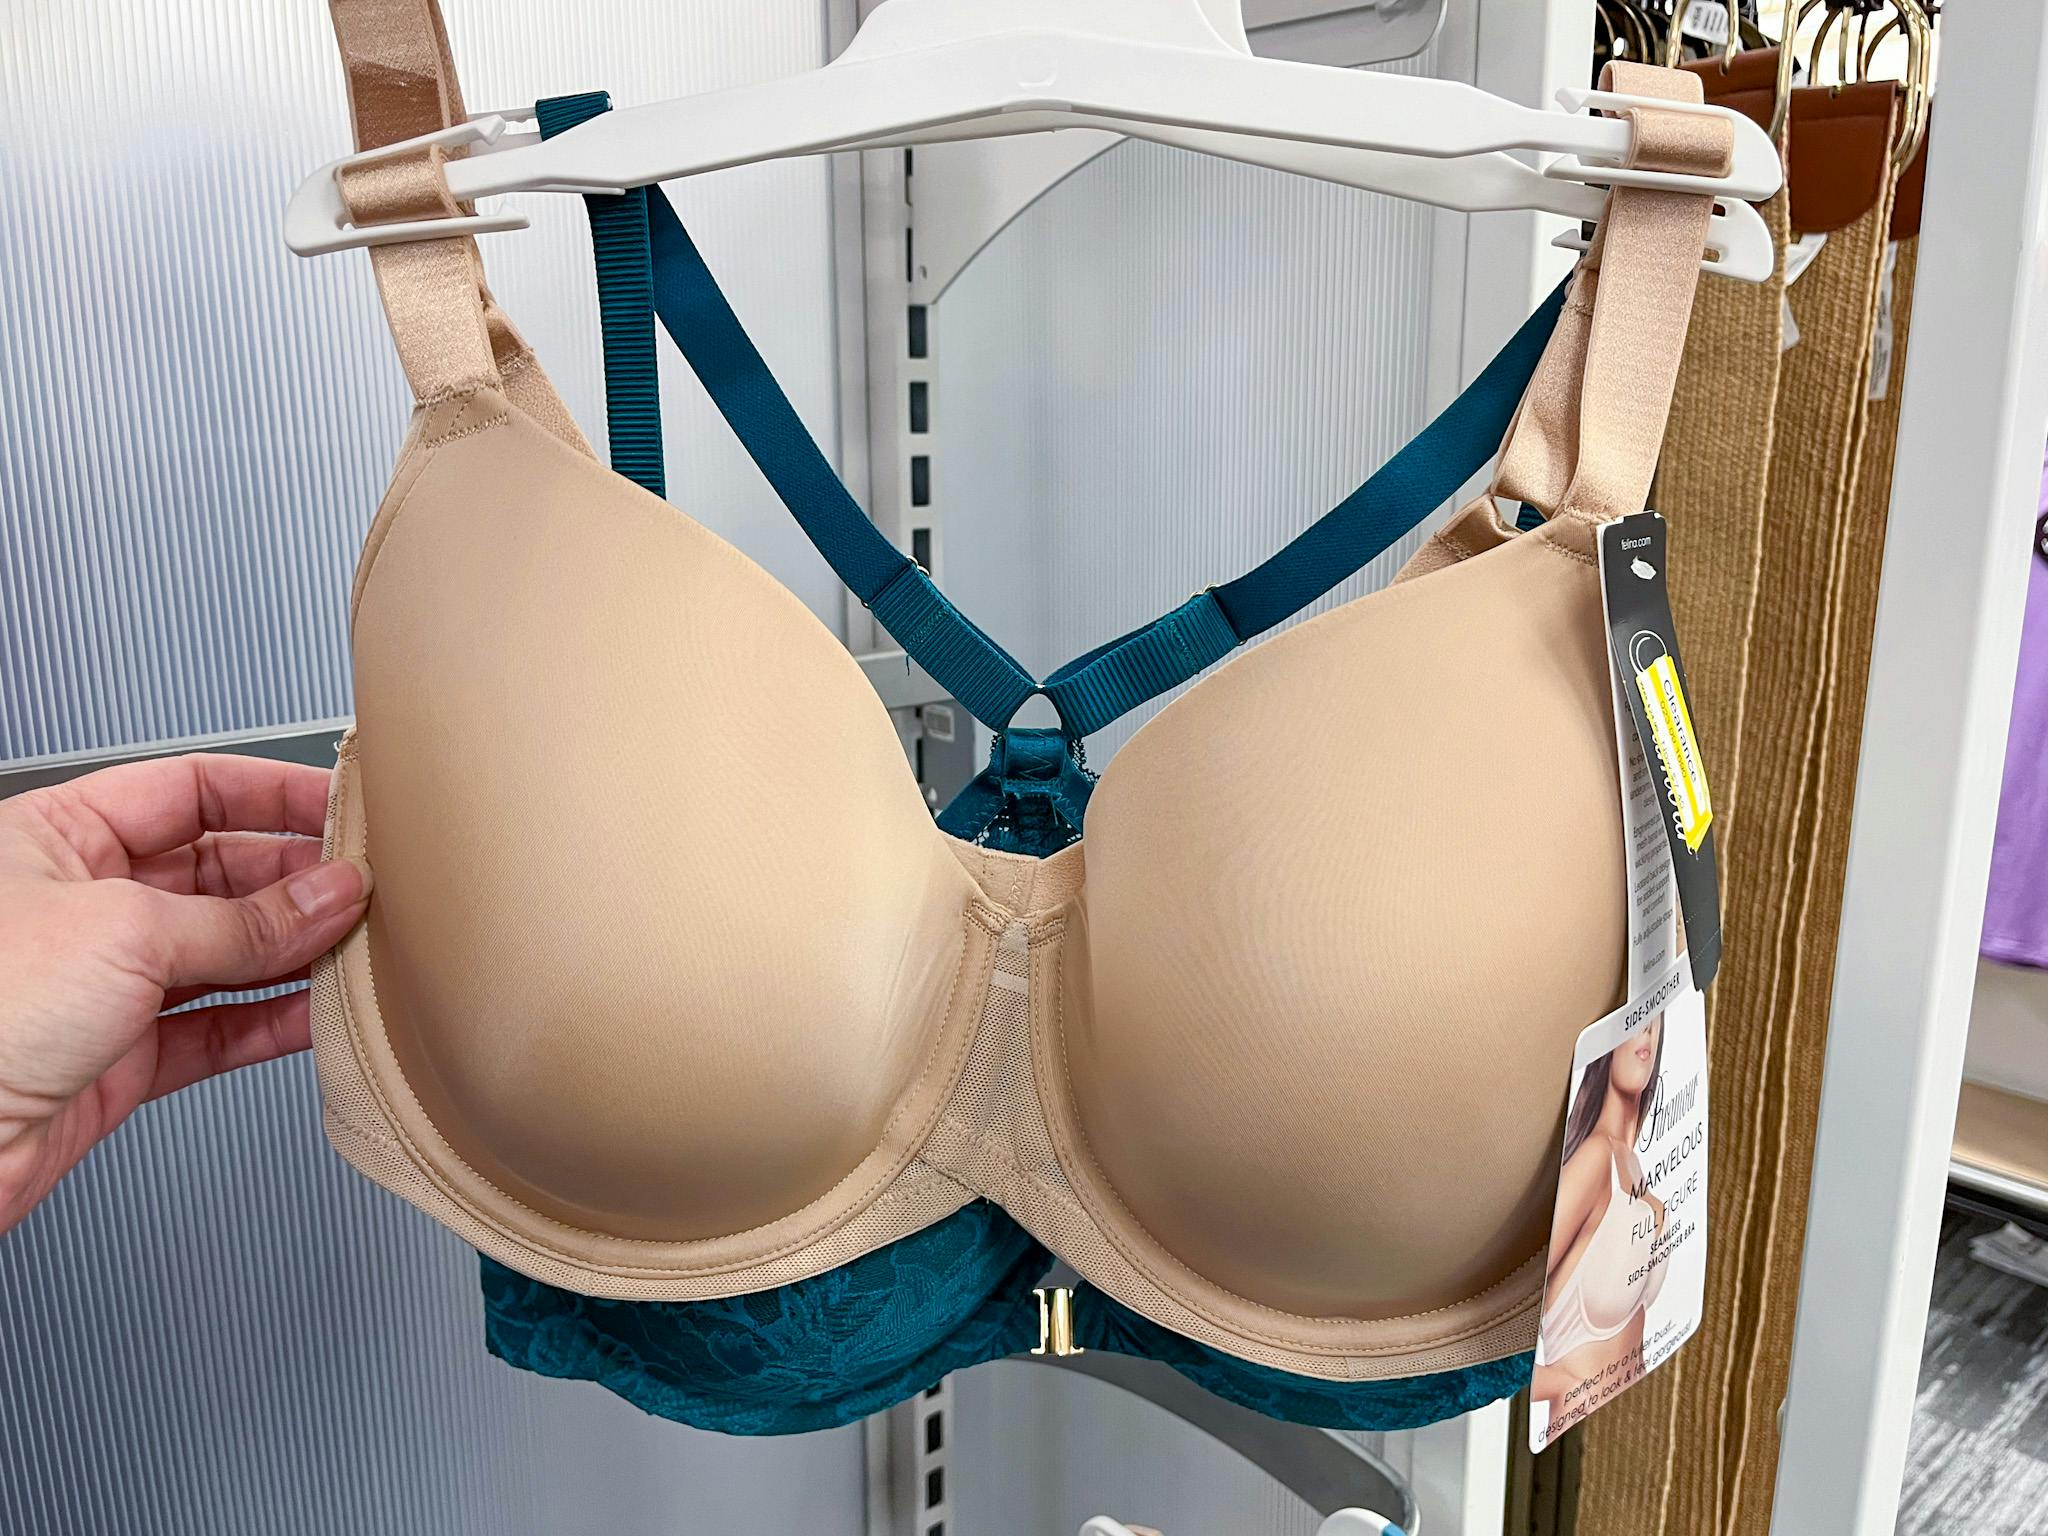 Massive Women's Bra Clearance, Up to 70% Off — As Low as $3.70 at